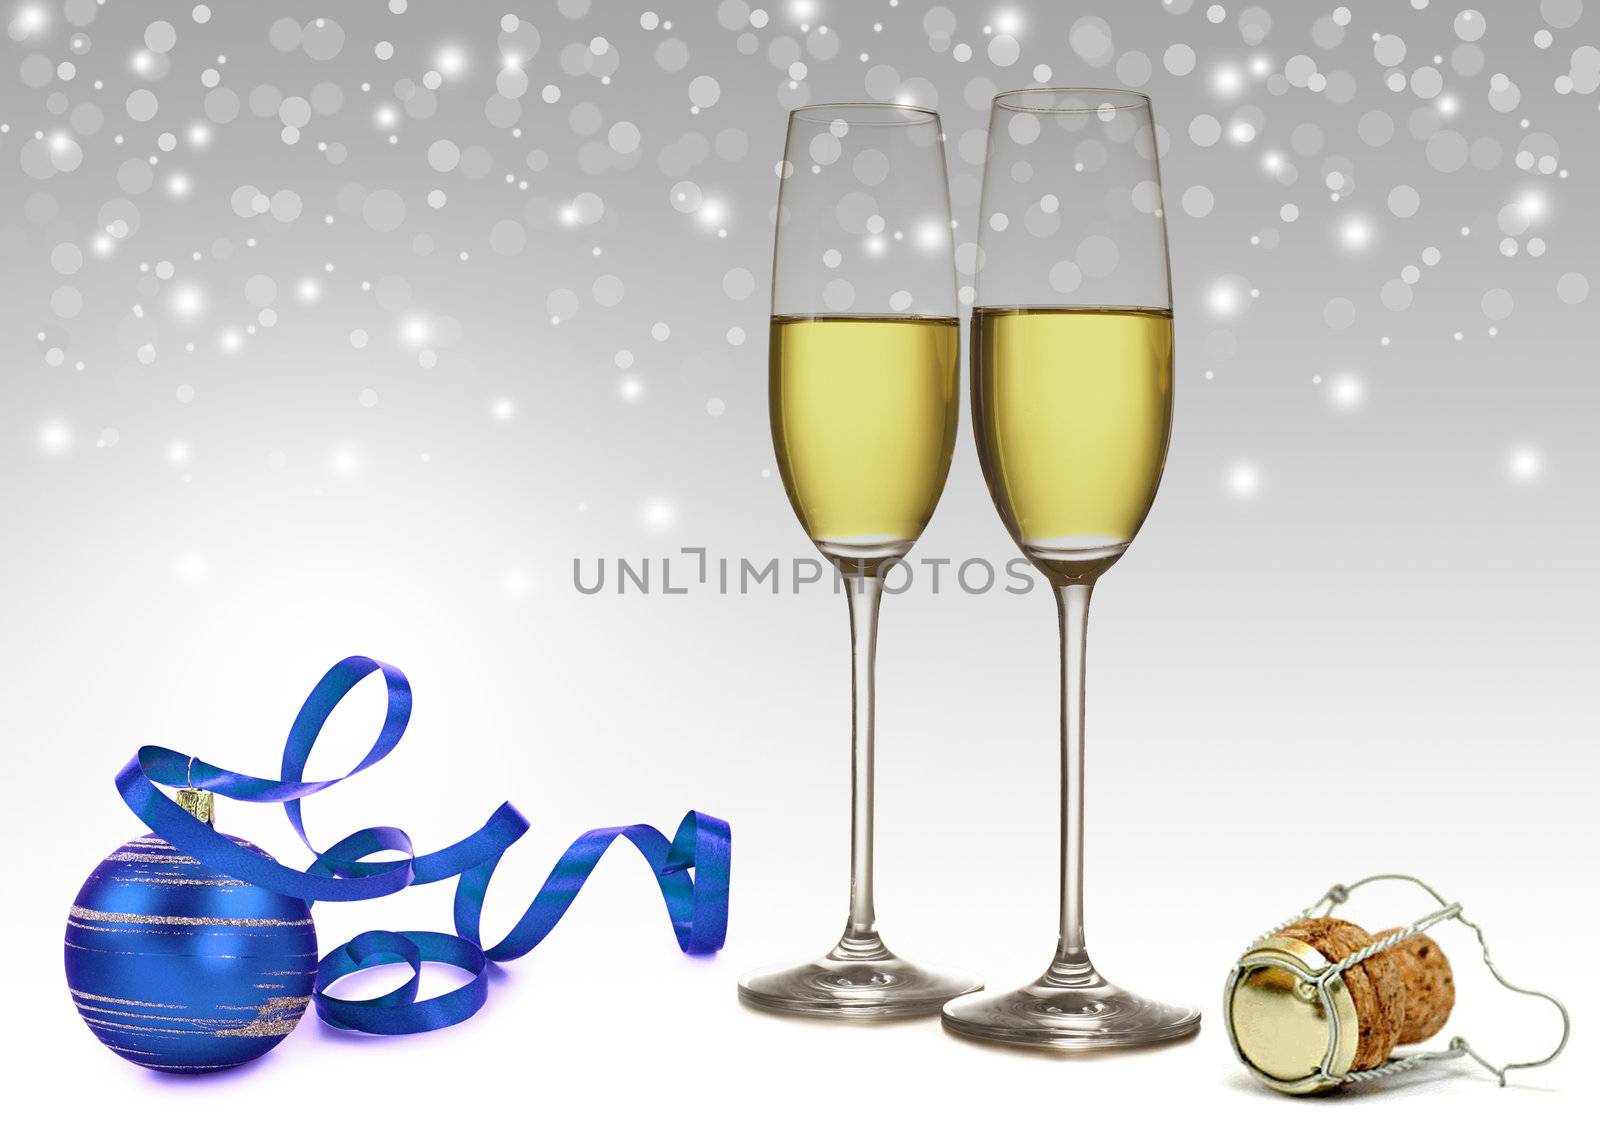 Seasonal greetings: a blue Christmas tree ornament with ribbon, 2 champagne glasses and a champagne cork on a light and
elegant white-grey bokeh background.